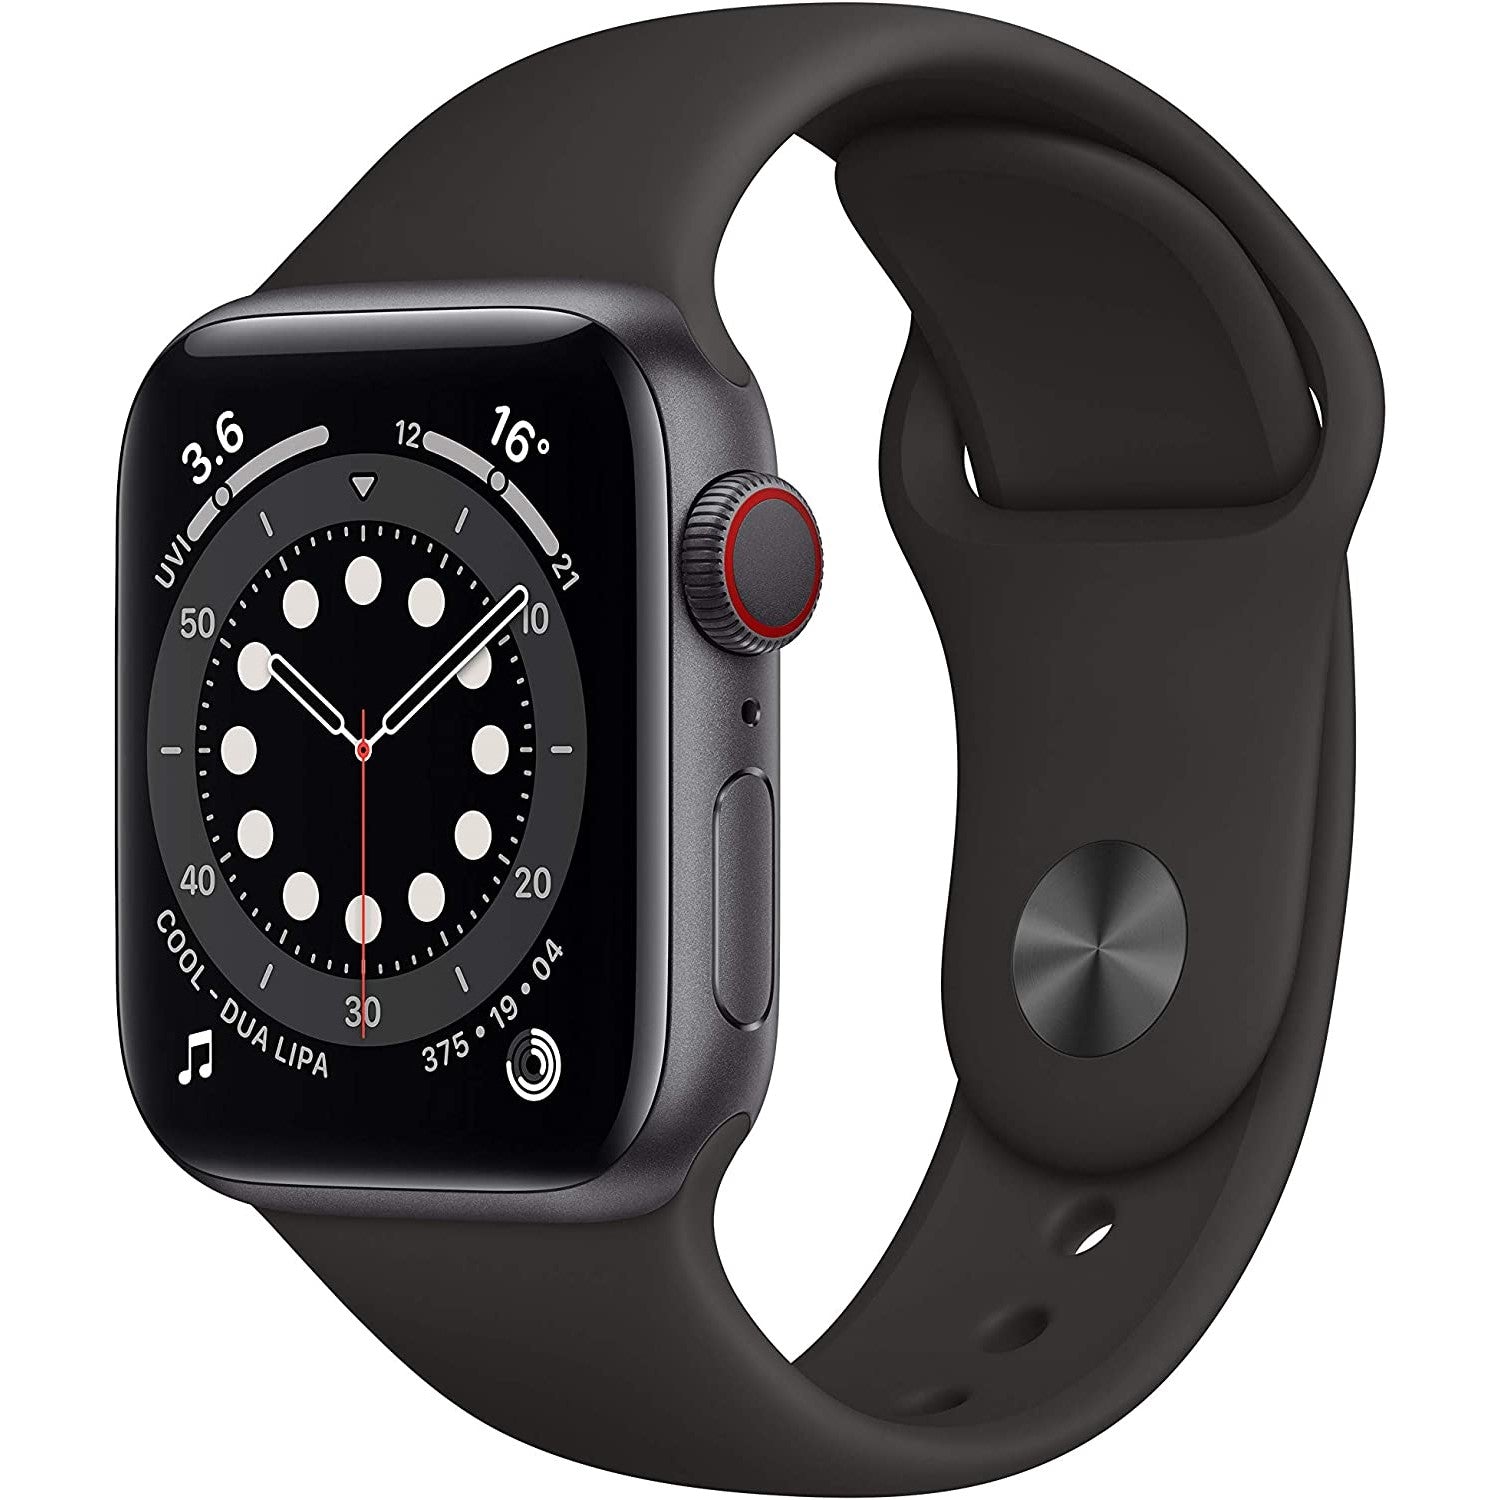 Apple Watch Series 6 GPS + Cellular - 40mm Graphite Stainless Steel Case with Black Sport Loop - New